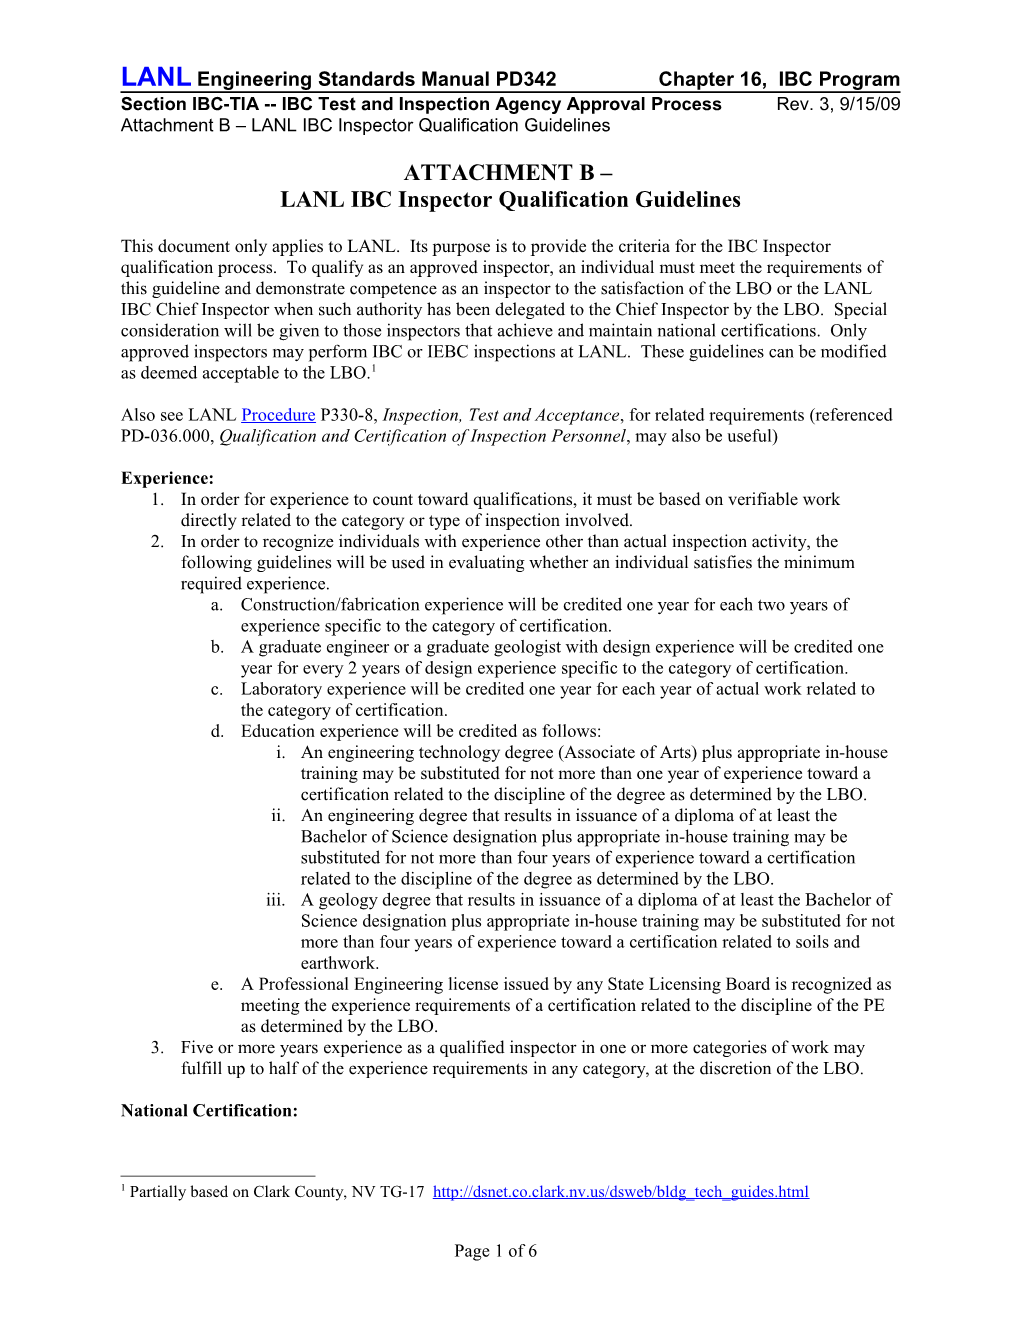 ATTACHMENT B LANL IBC Inspector Qualification Guidelines